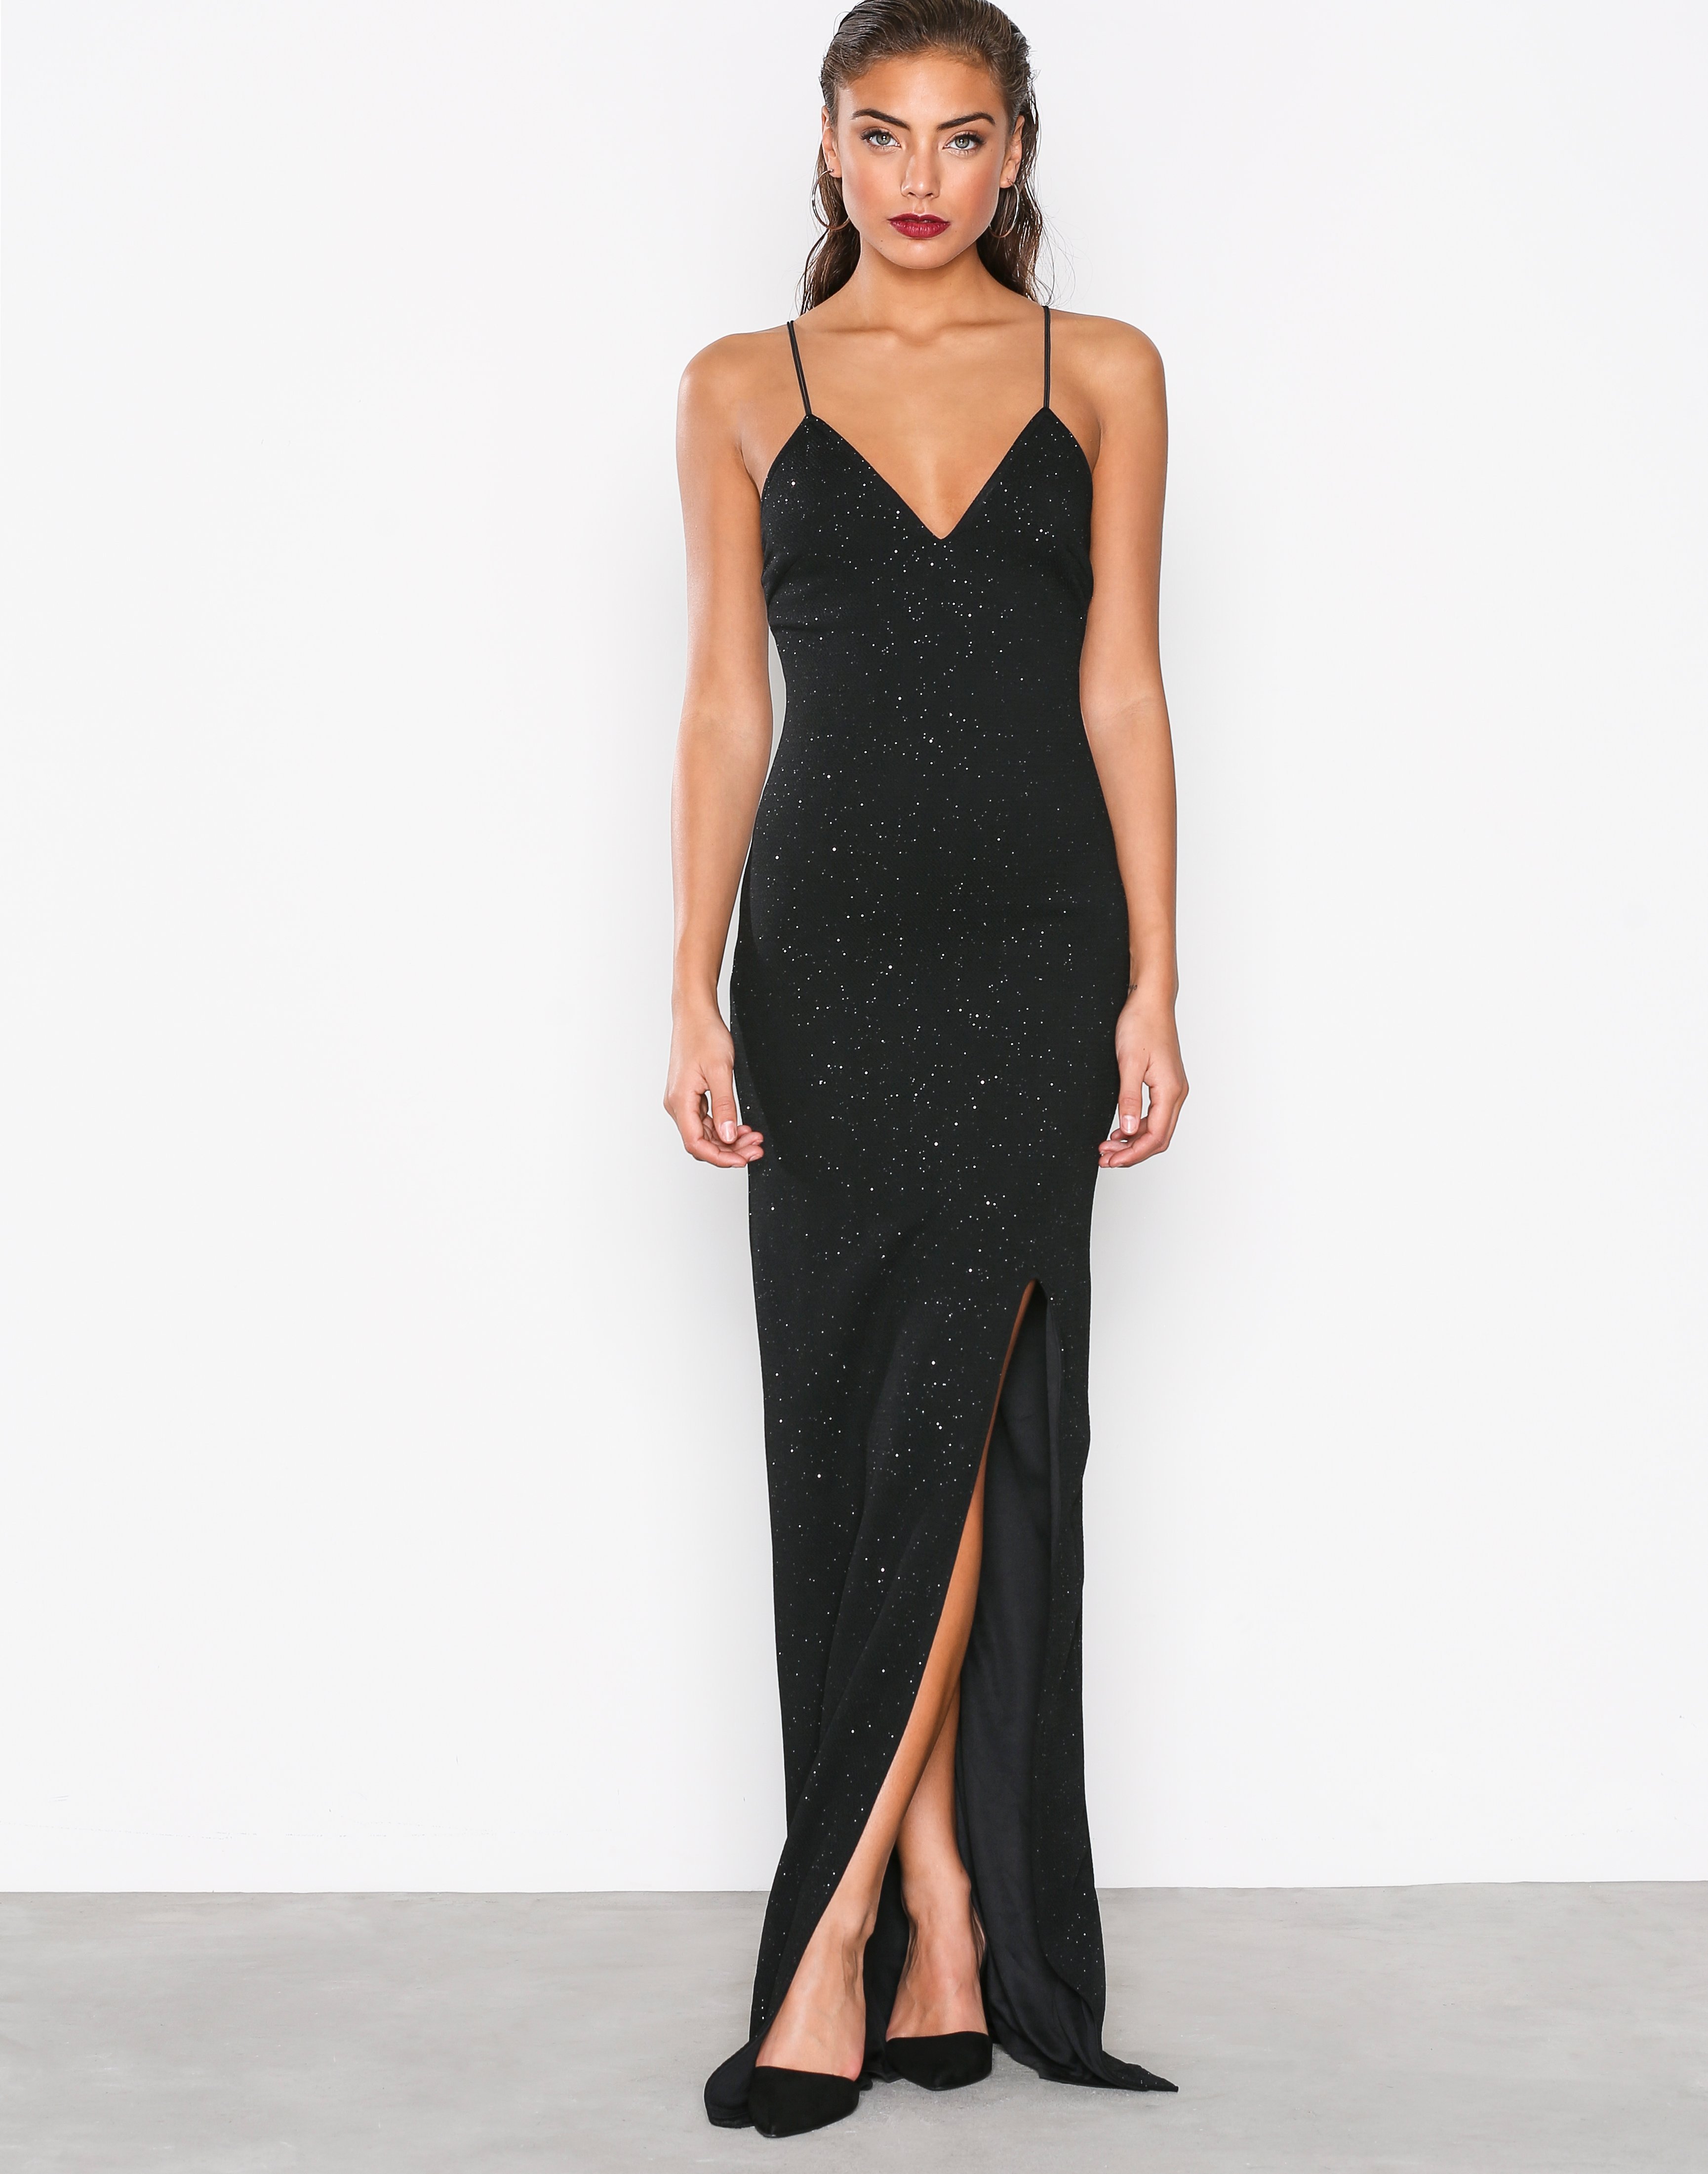 All Over Sparkle Gown - Nly Eve - Black - Party Dresses - Clothing ...